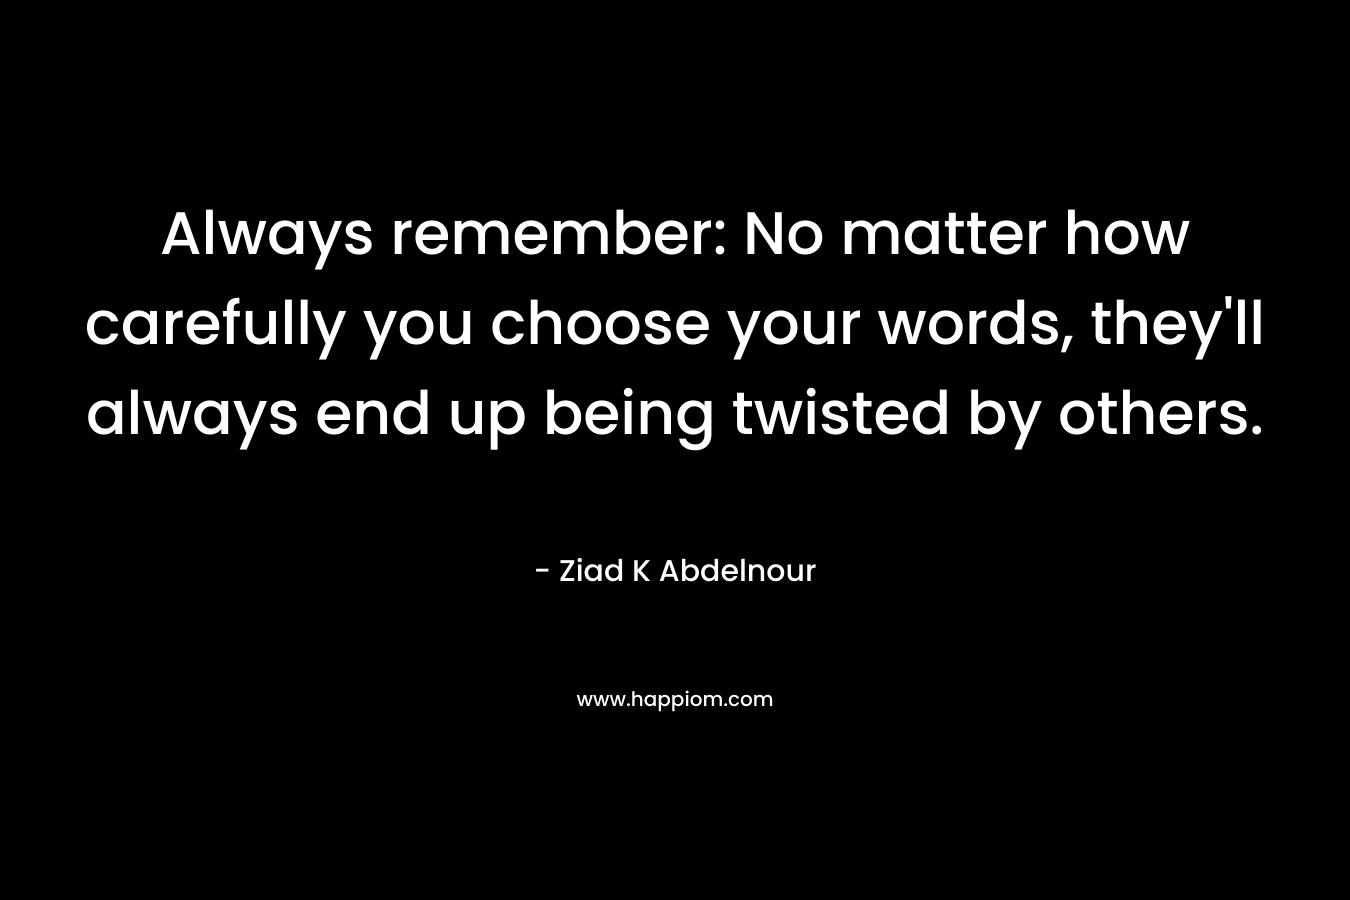 Always remember: No matter how carefully you choose your words, they'll always end up being twisted by others.